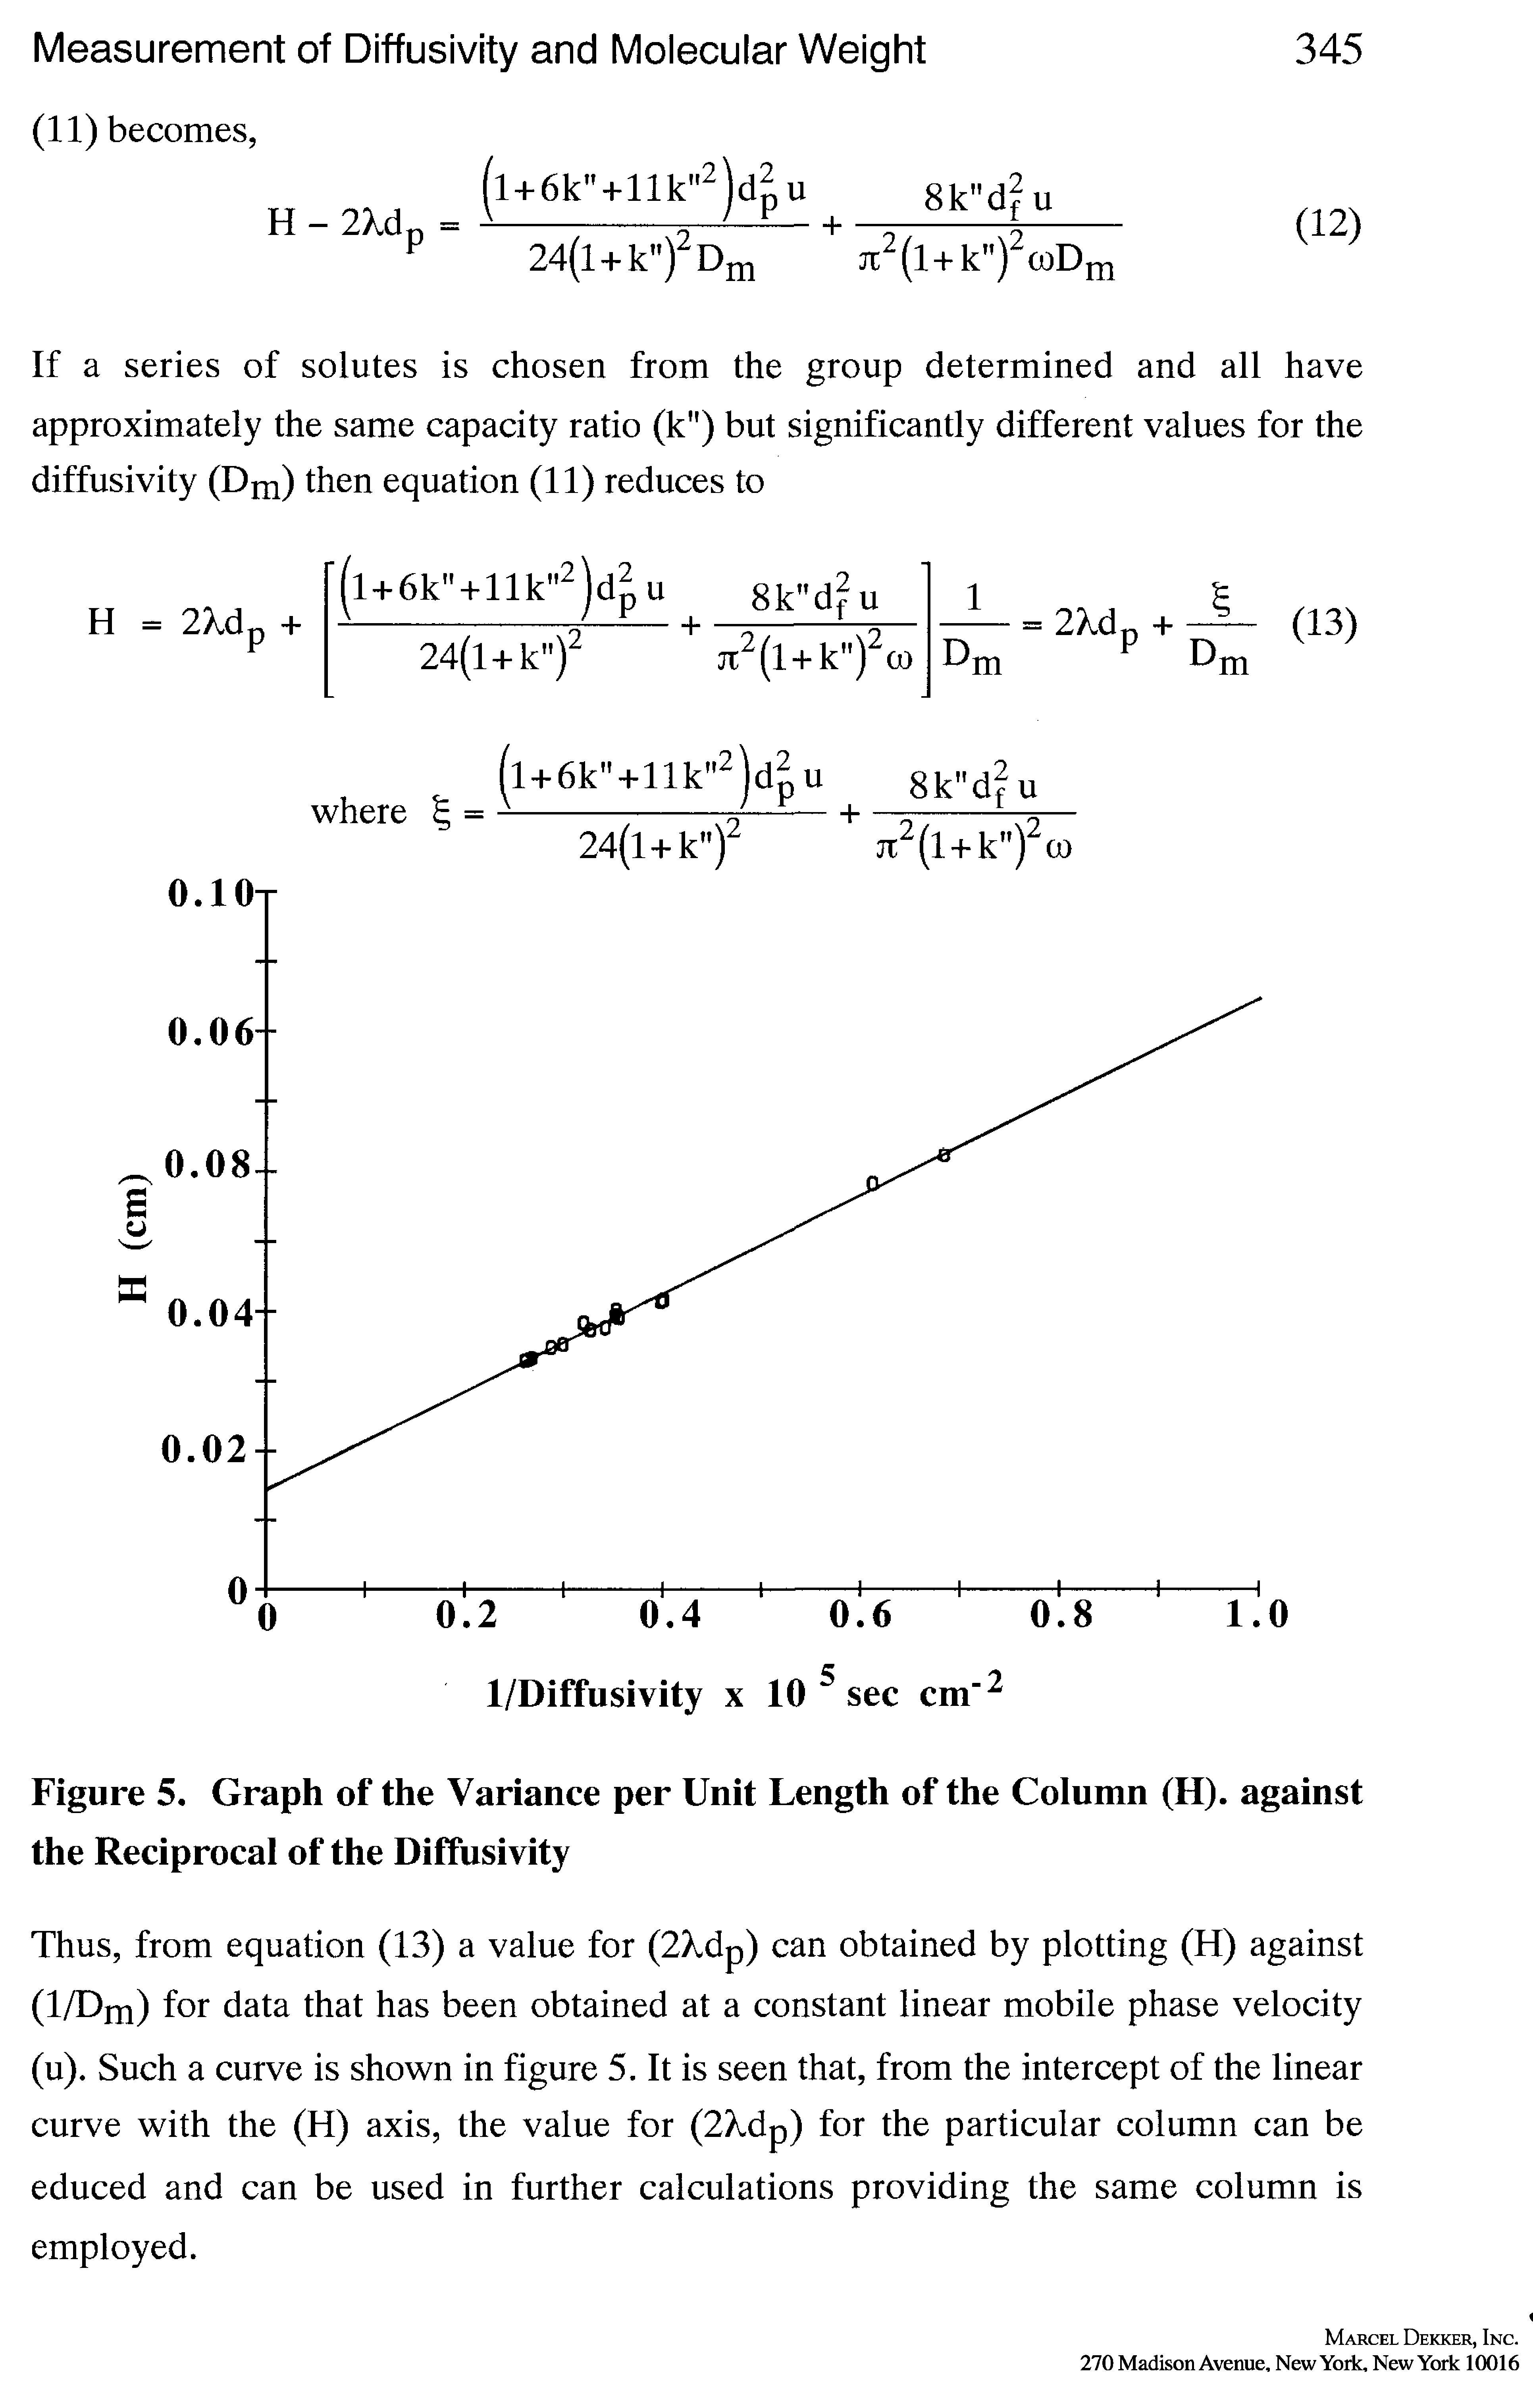 Figure 5, Graph of the Variance per Unit Length of the Column (H). against the Reciprocal of the Diffusivity...